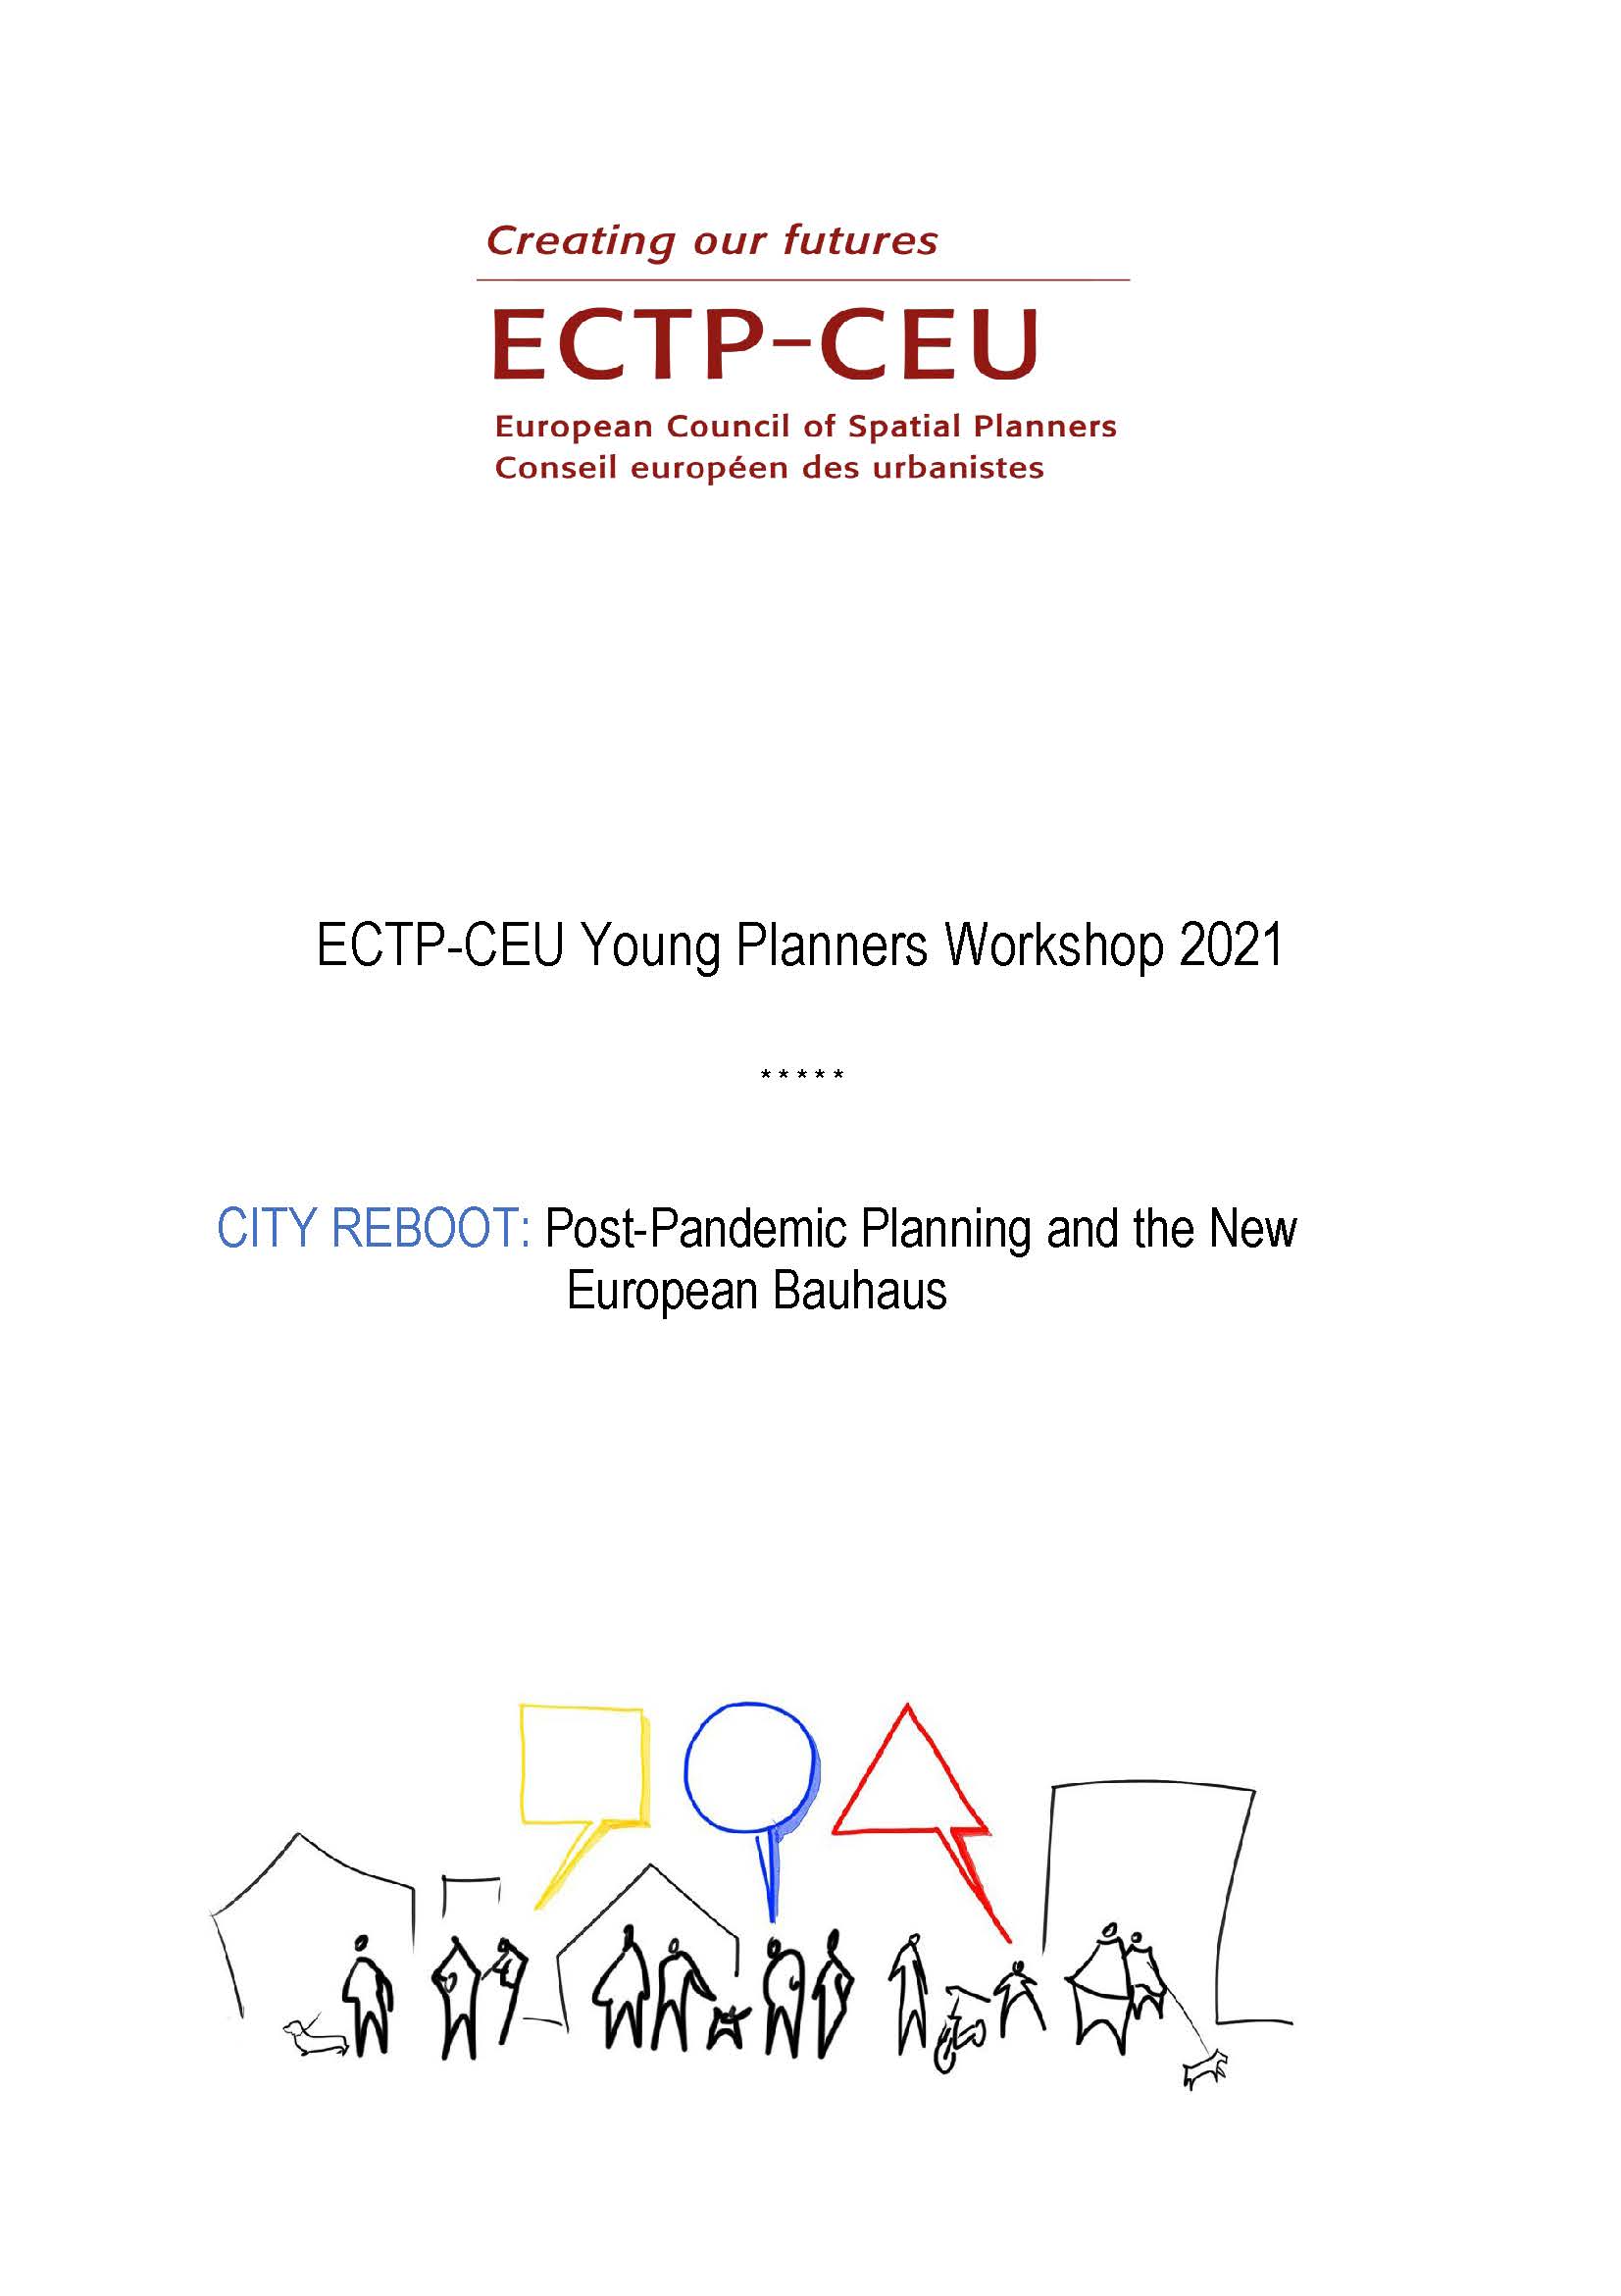 ECTP Young Planners 2021 Page de garde 032021